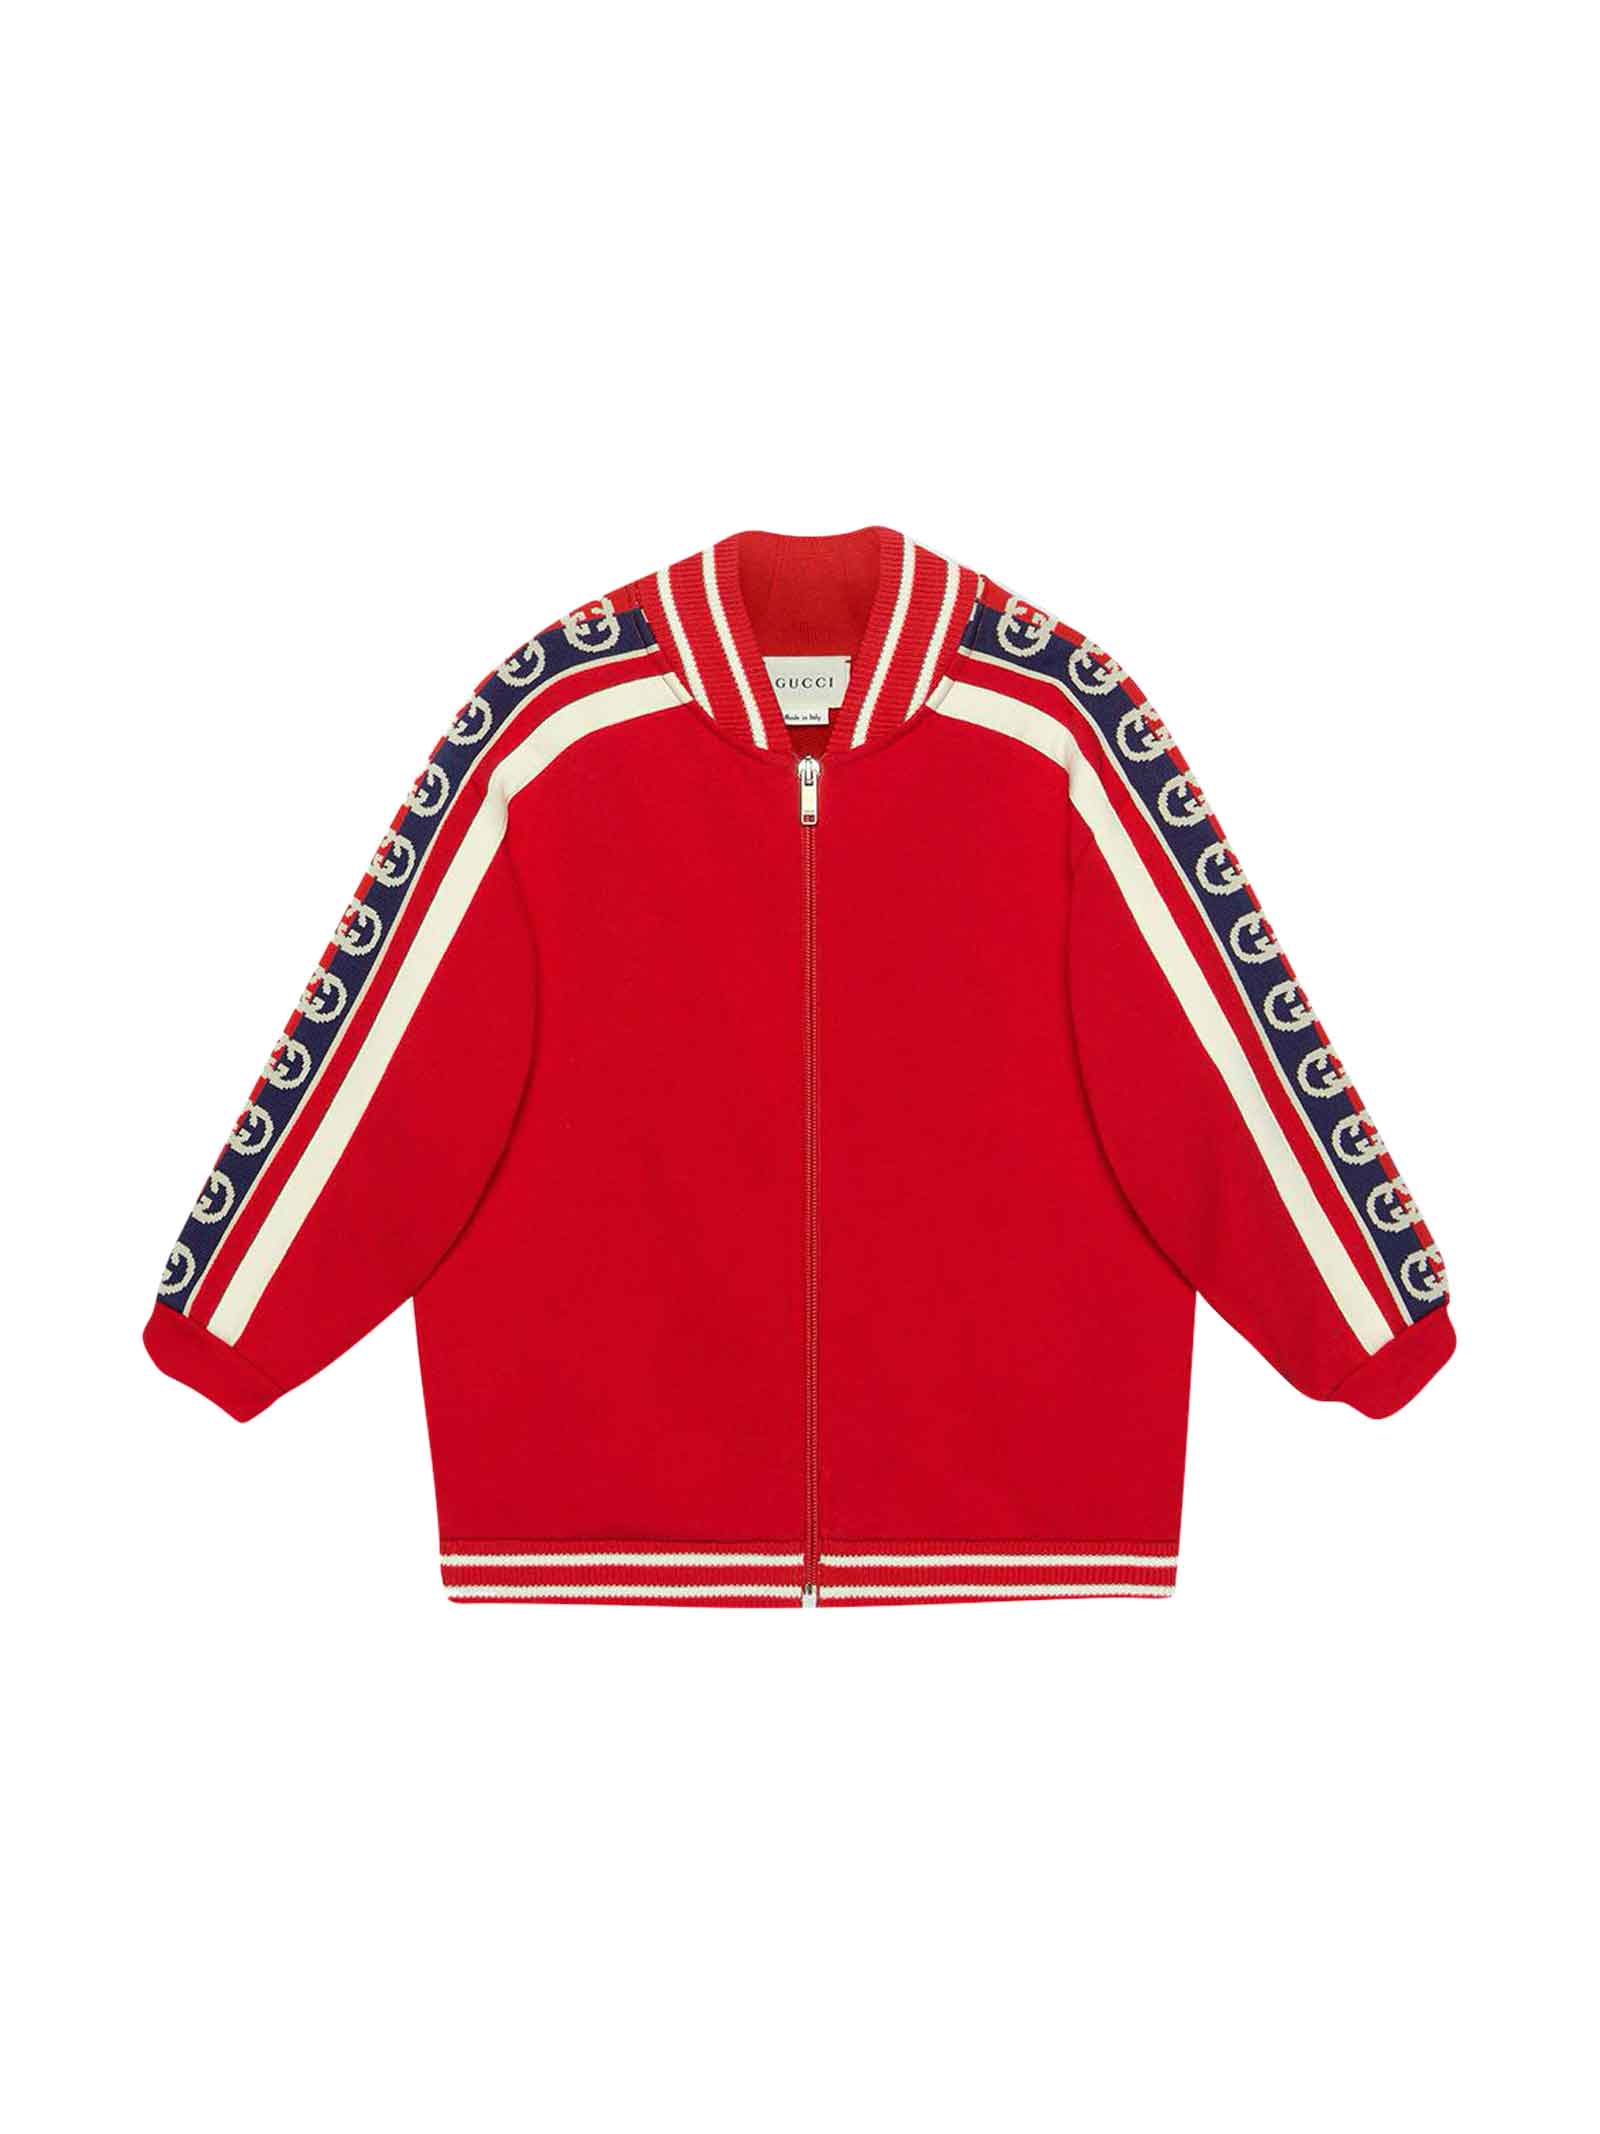 GUCCI RED SWEATSHIRT WITH LATERAL LOGO BAND,11261149